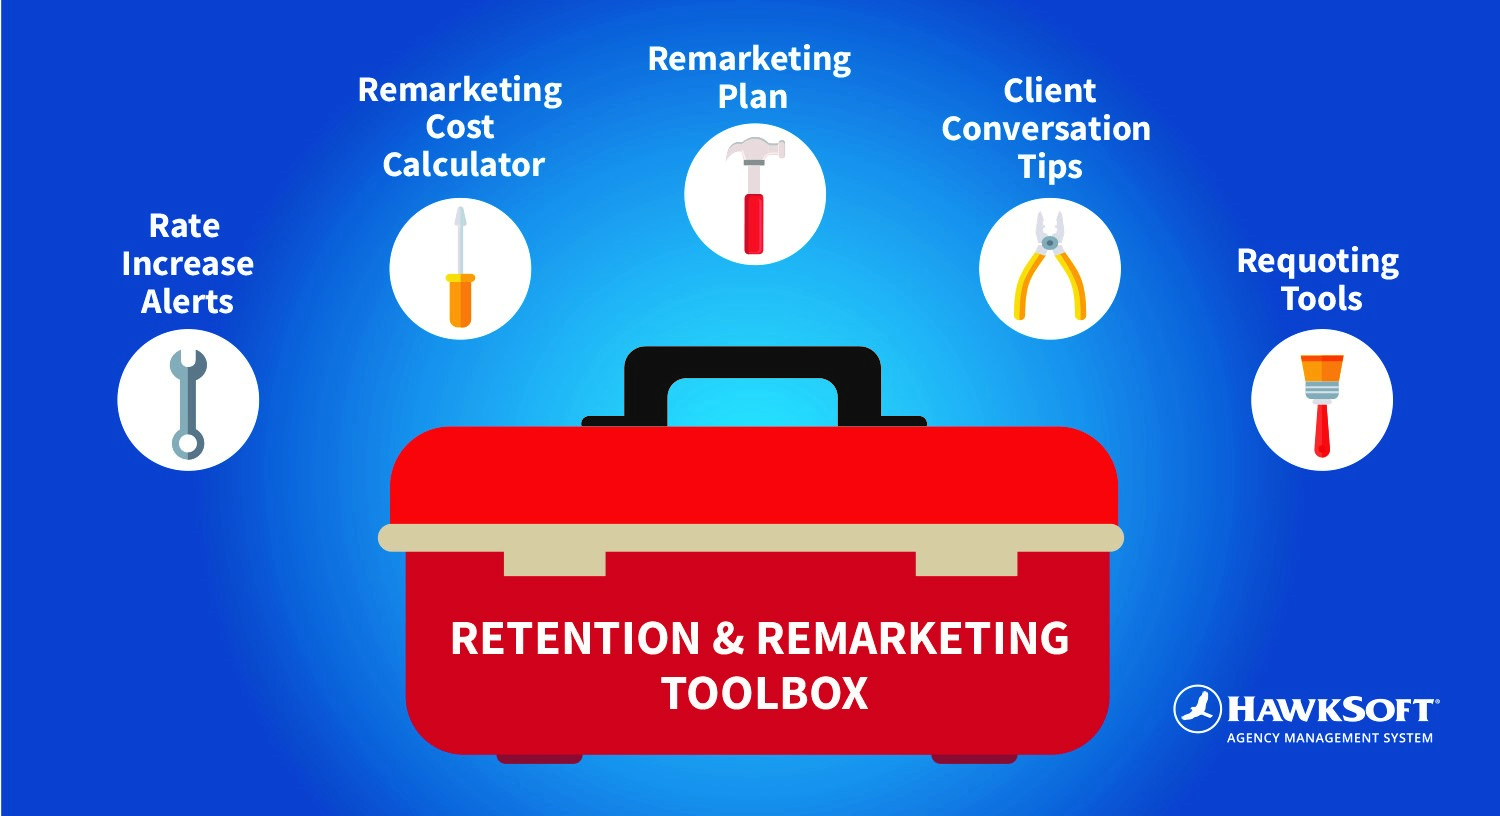 Toolbox for retention & remarketing